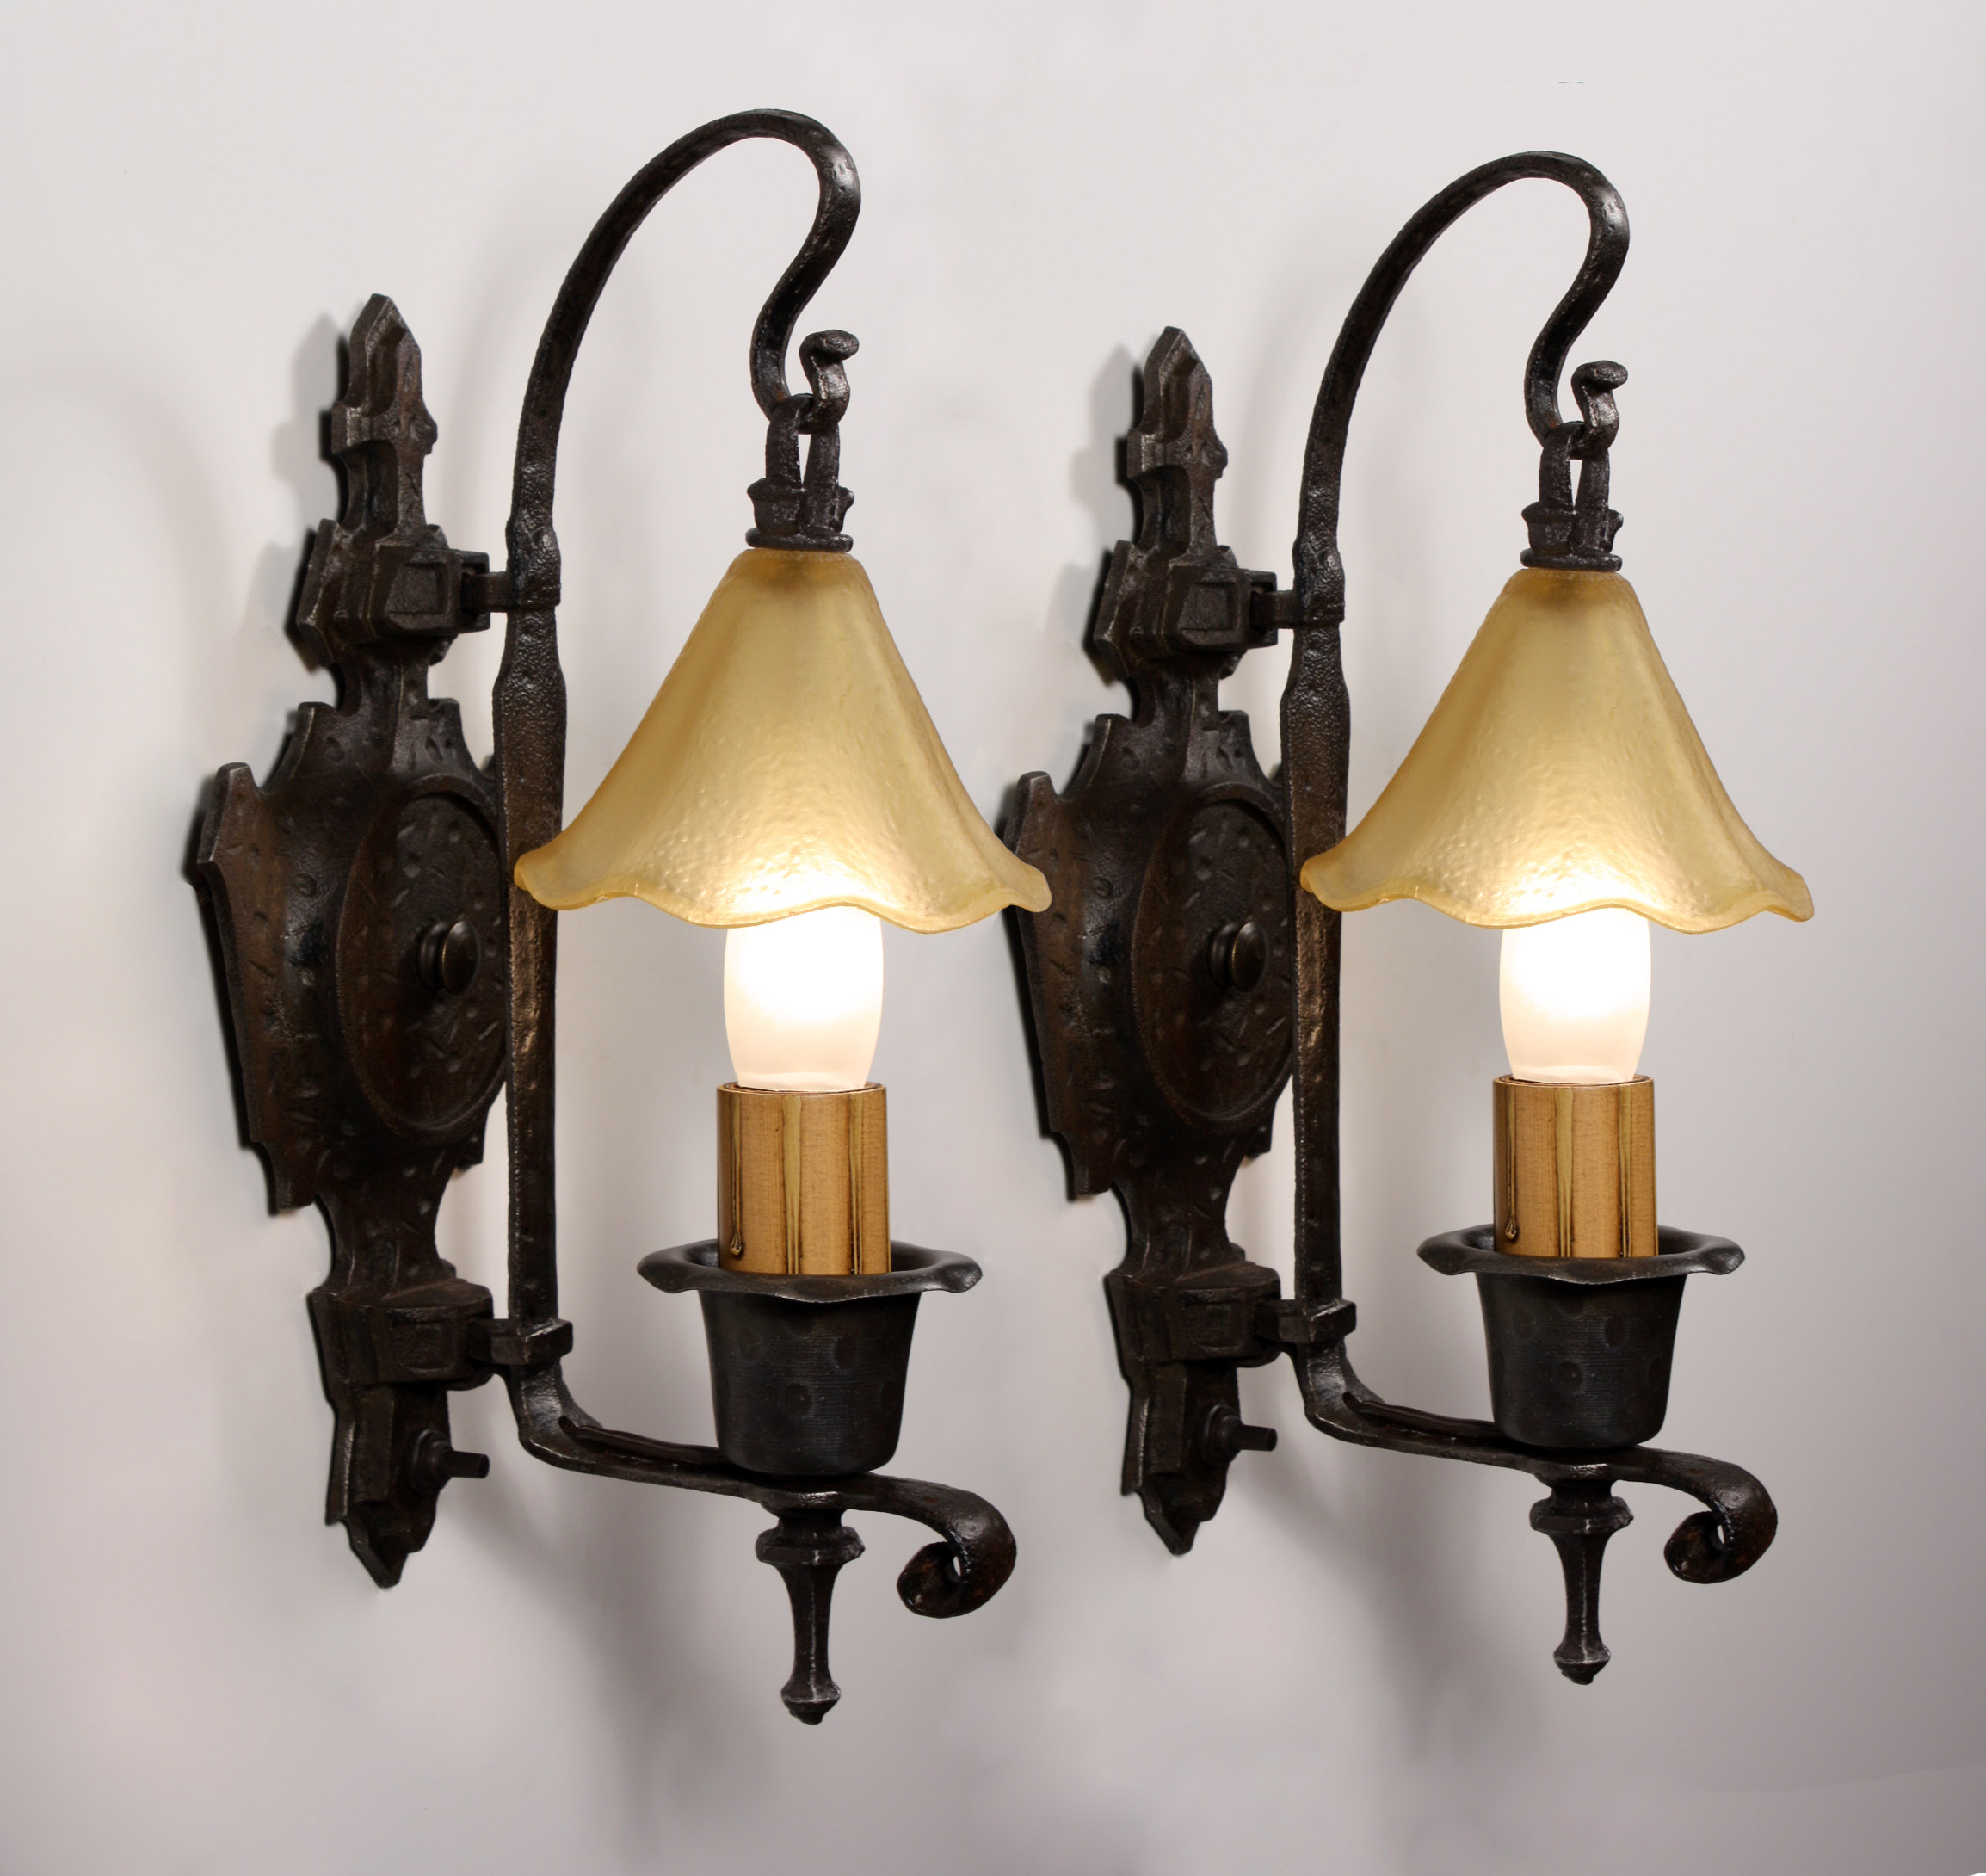 SOLD Remarkable Pair of Antique Single-Arm Cast Iron Sconces with Original Snuffer Shades-0